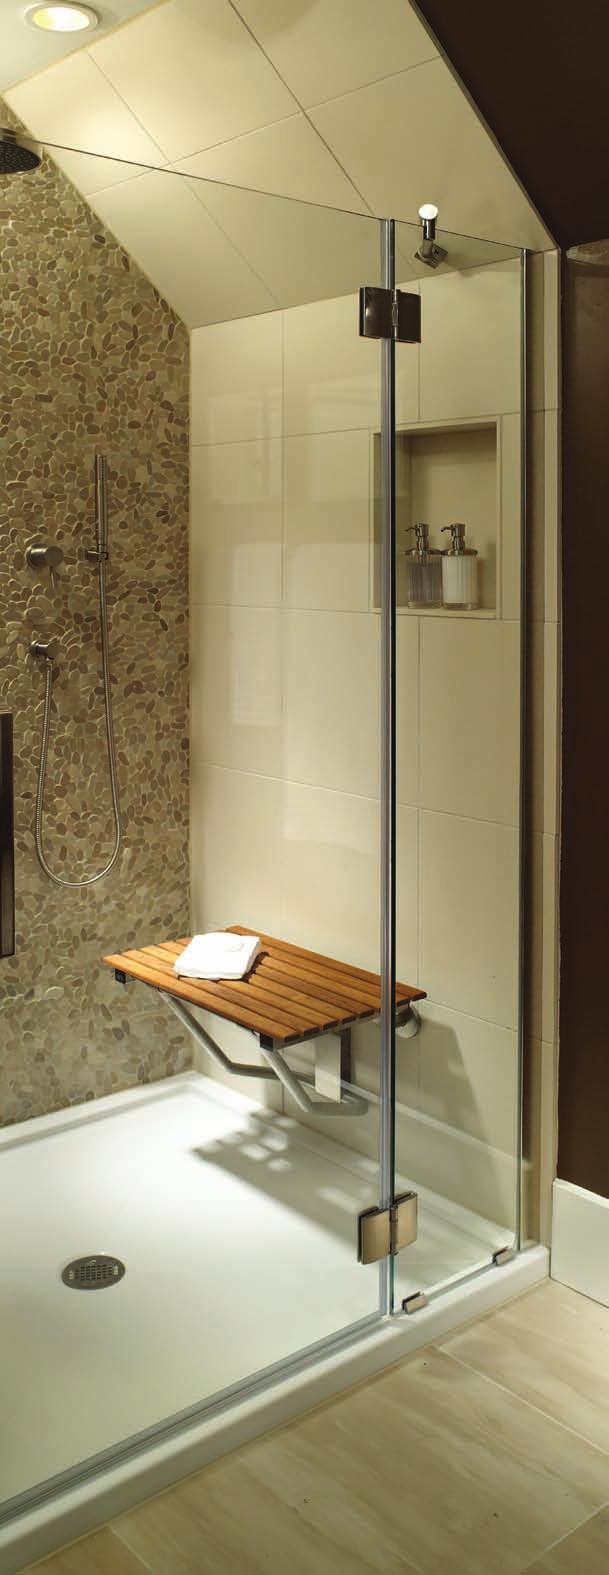 COMPLEMENTING TEAK PRODUCTS FACILITATE ACCESSIBILITY. Two styles of teak shower seats are available, designed to be mounted inside or outside the shower.